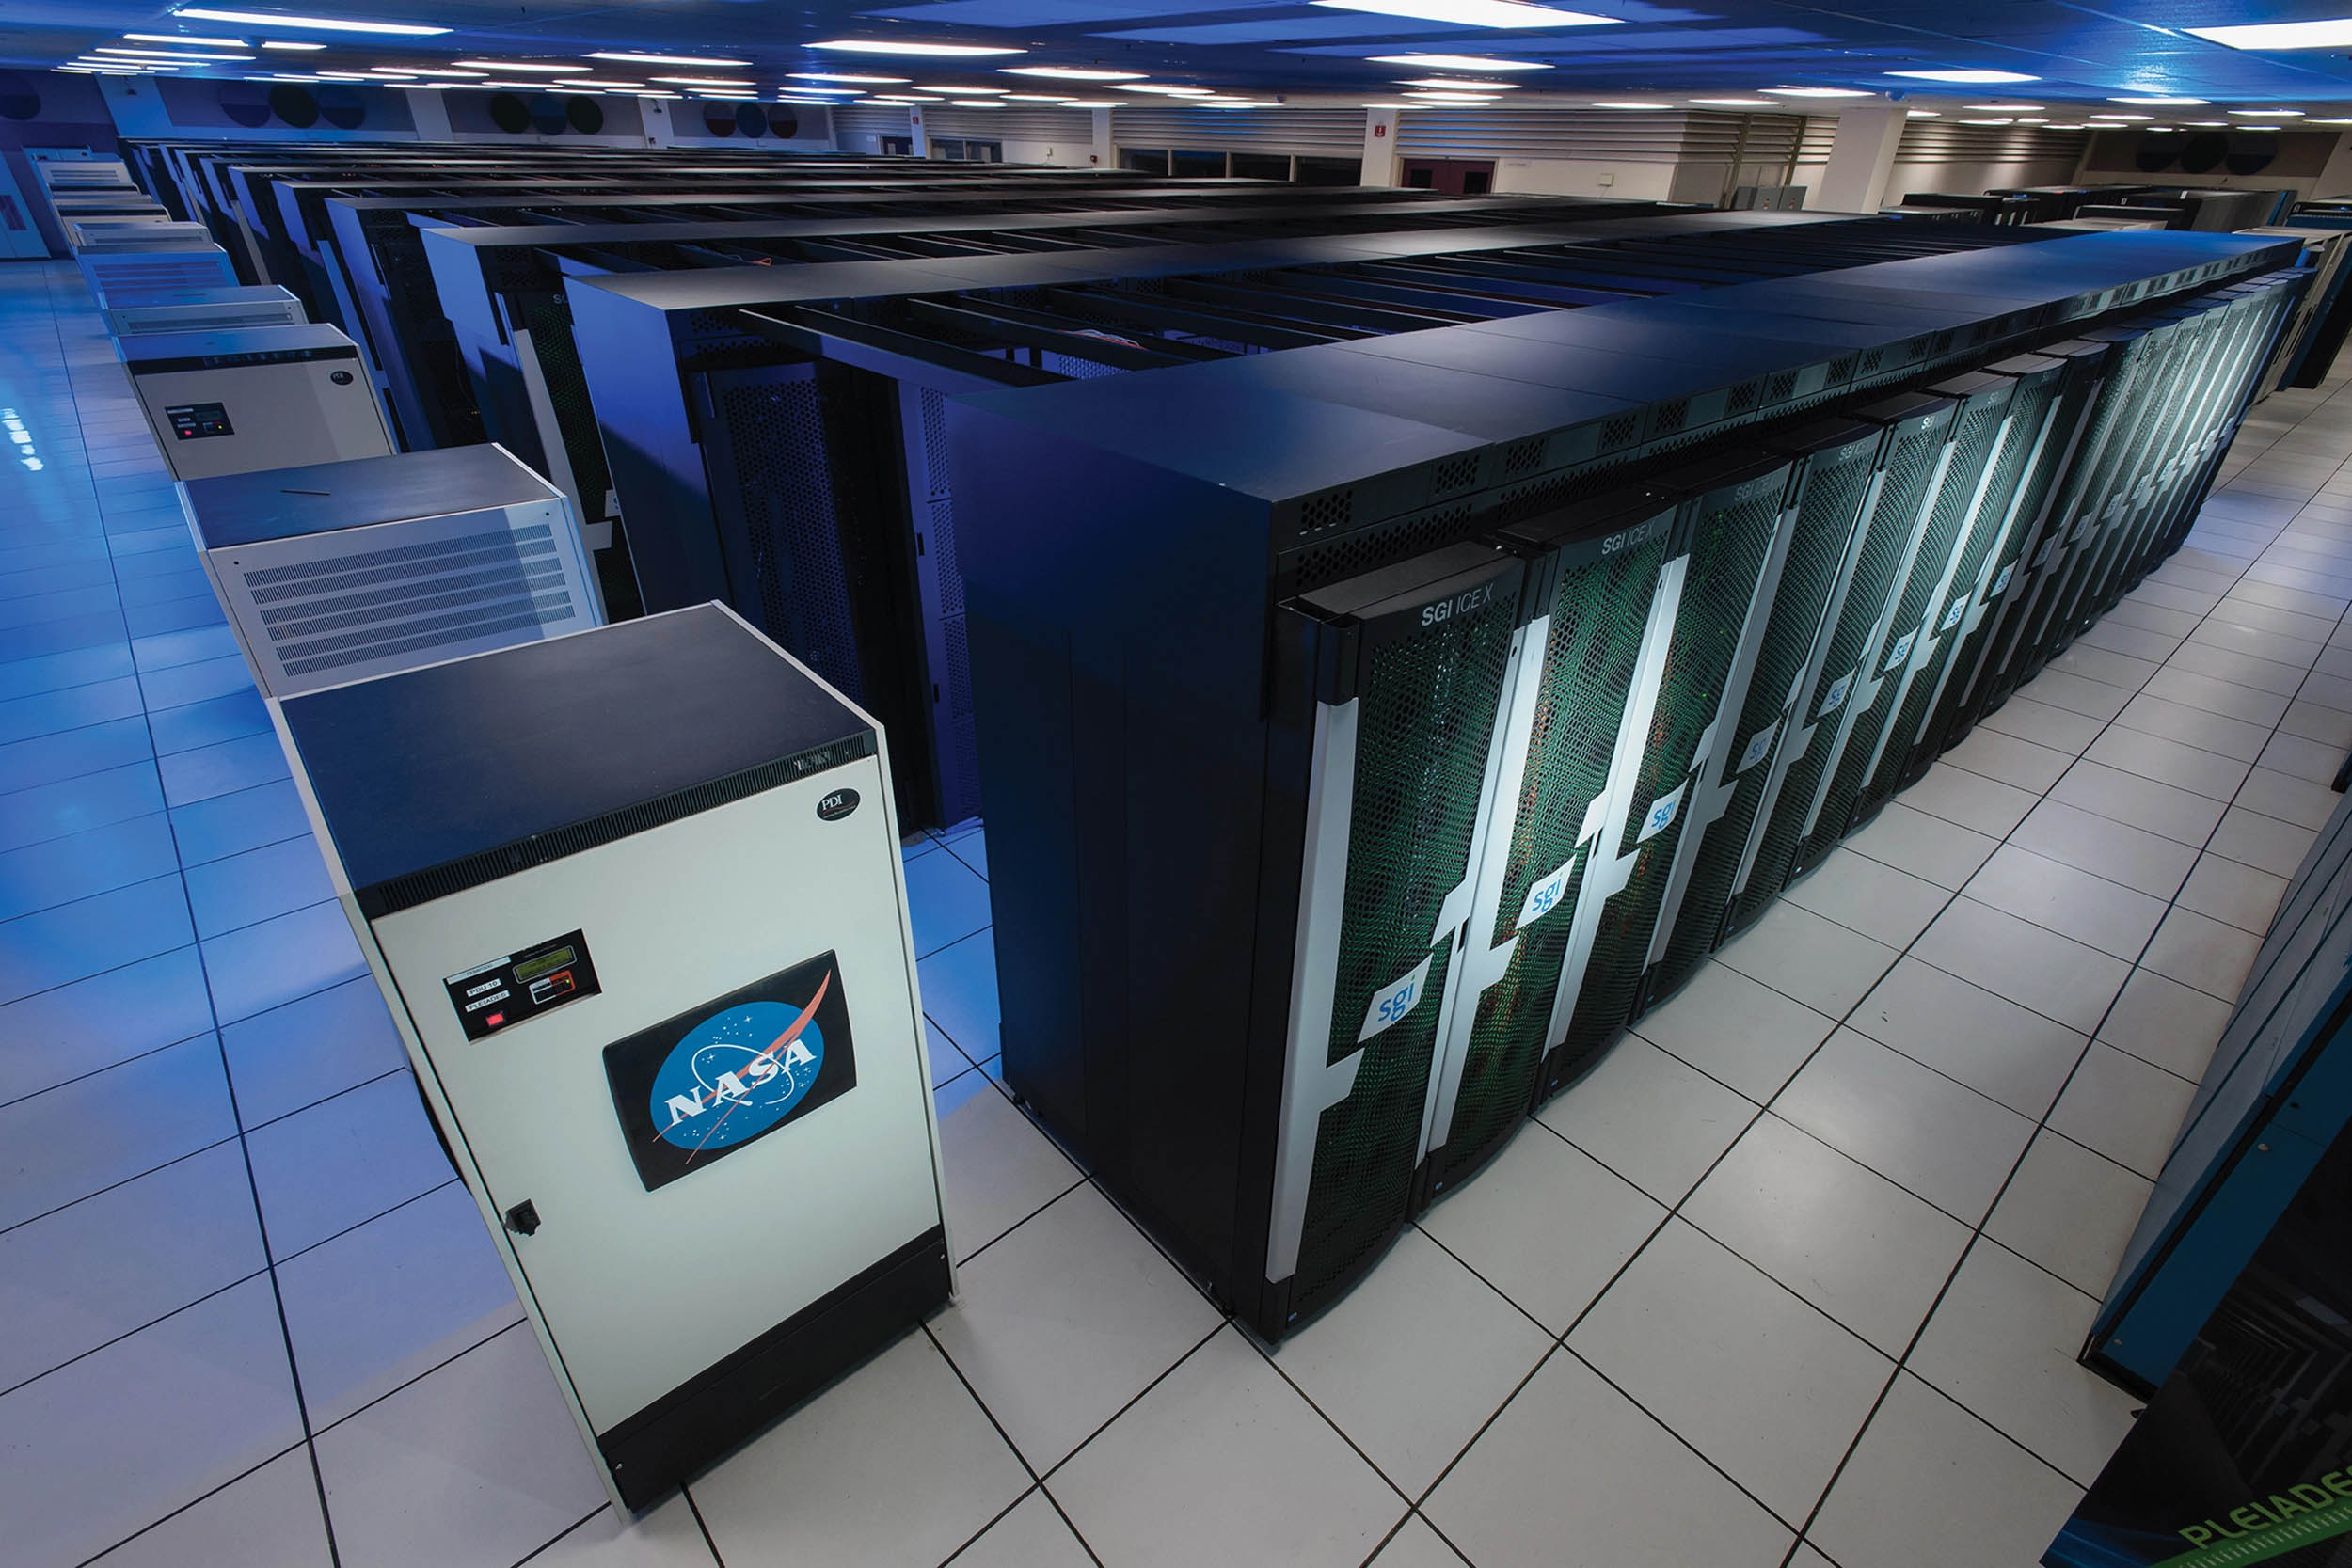 Pleiades supercomputer at NASA Ames is one of many supercomputers used to find limit of quantum supremacy, April 10, 2015 (NASA/Ames Research Center/Dominic Hart)